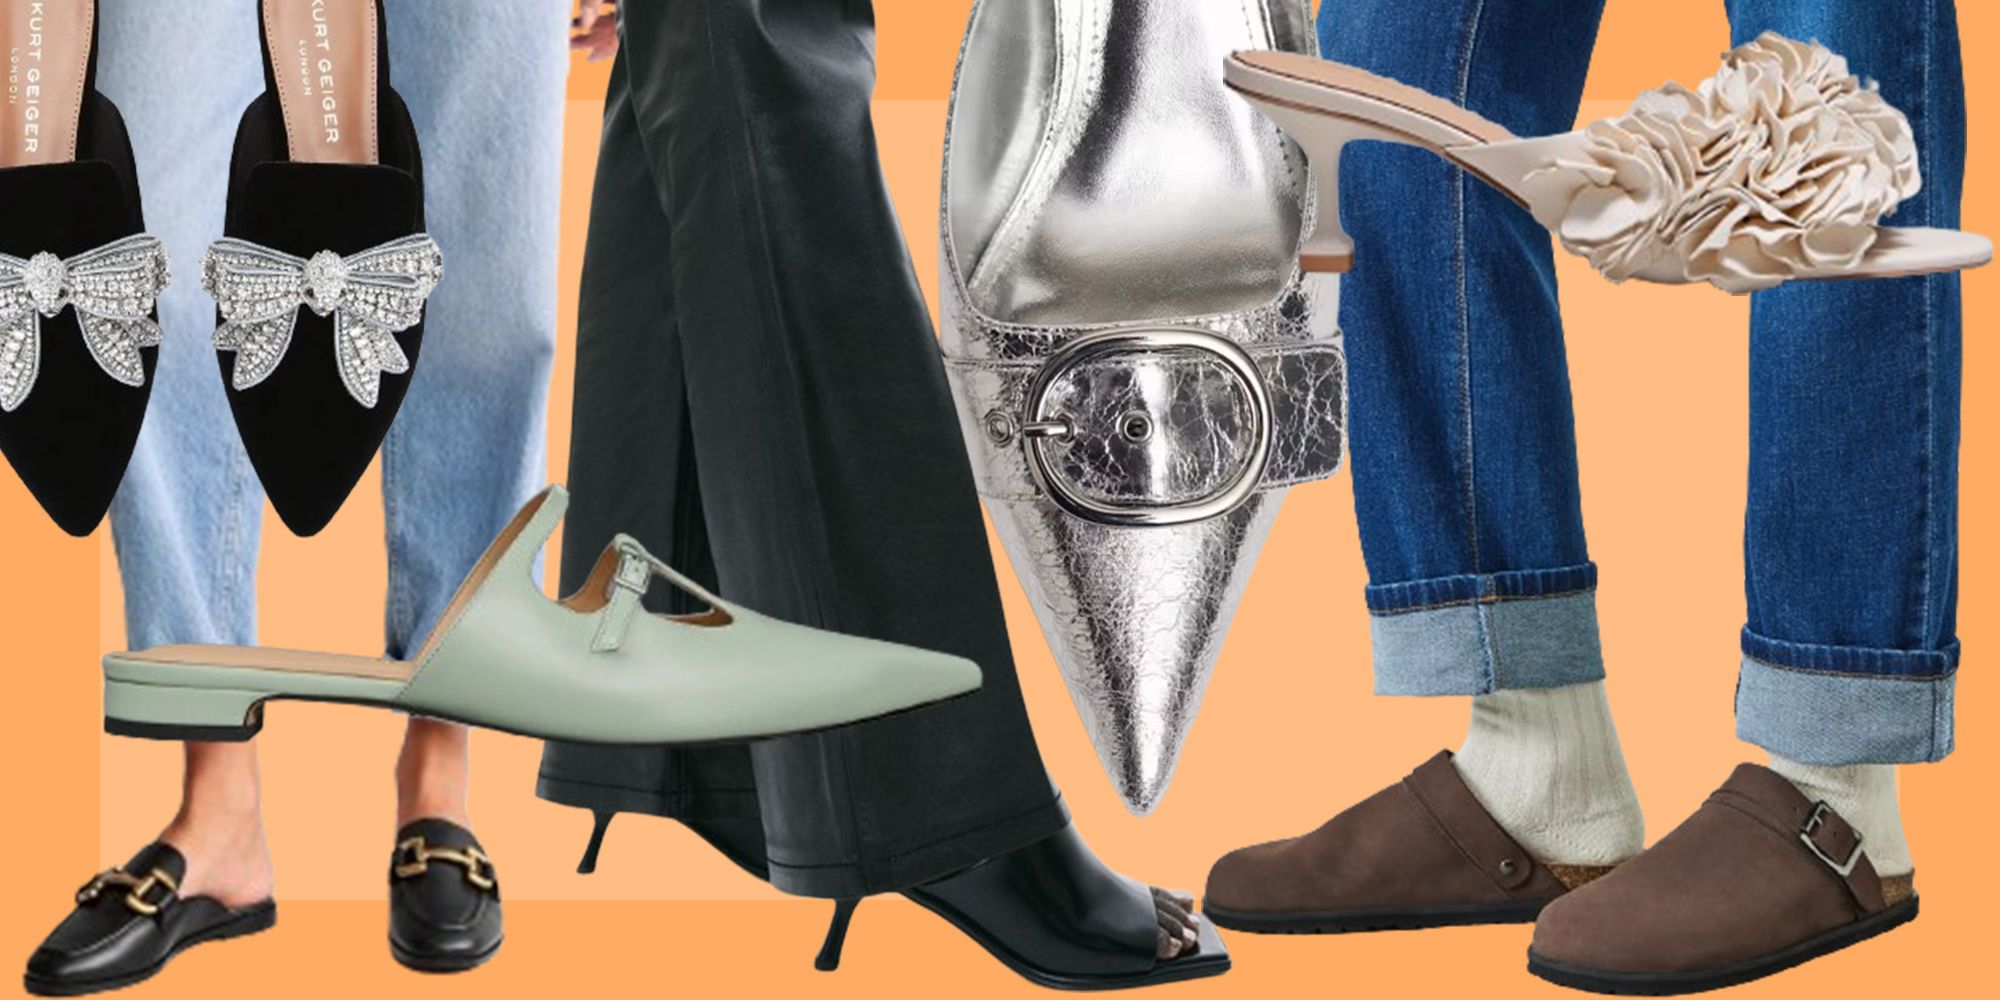 45 Best Shoes to Wear With Dresses 2023: Pumps, Flats, Mules, Sandals -  Parade